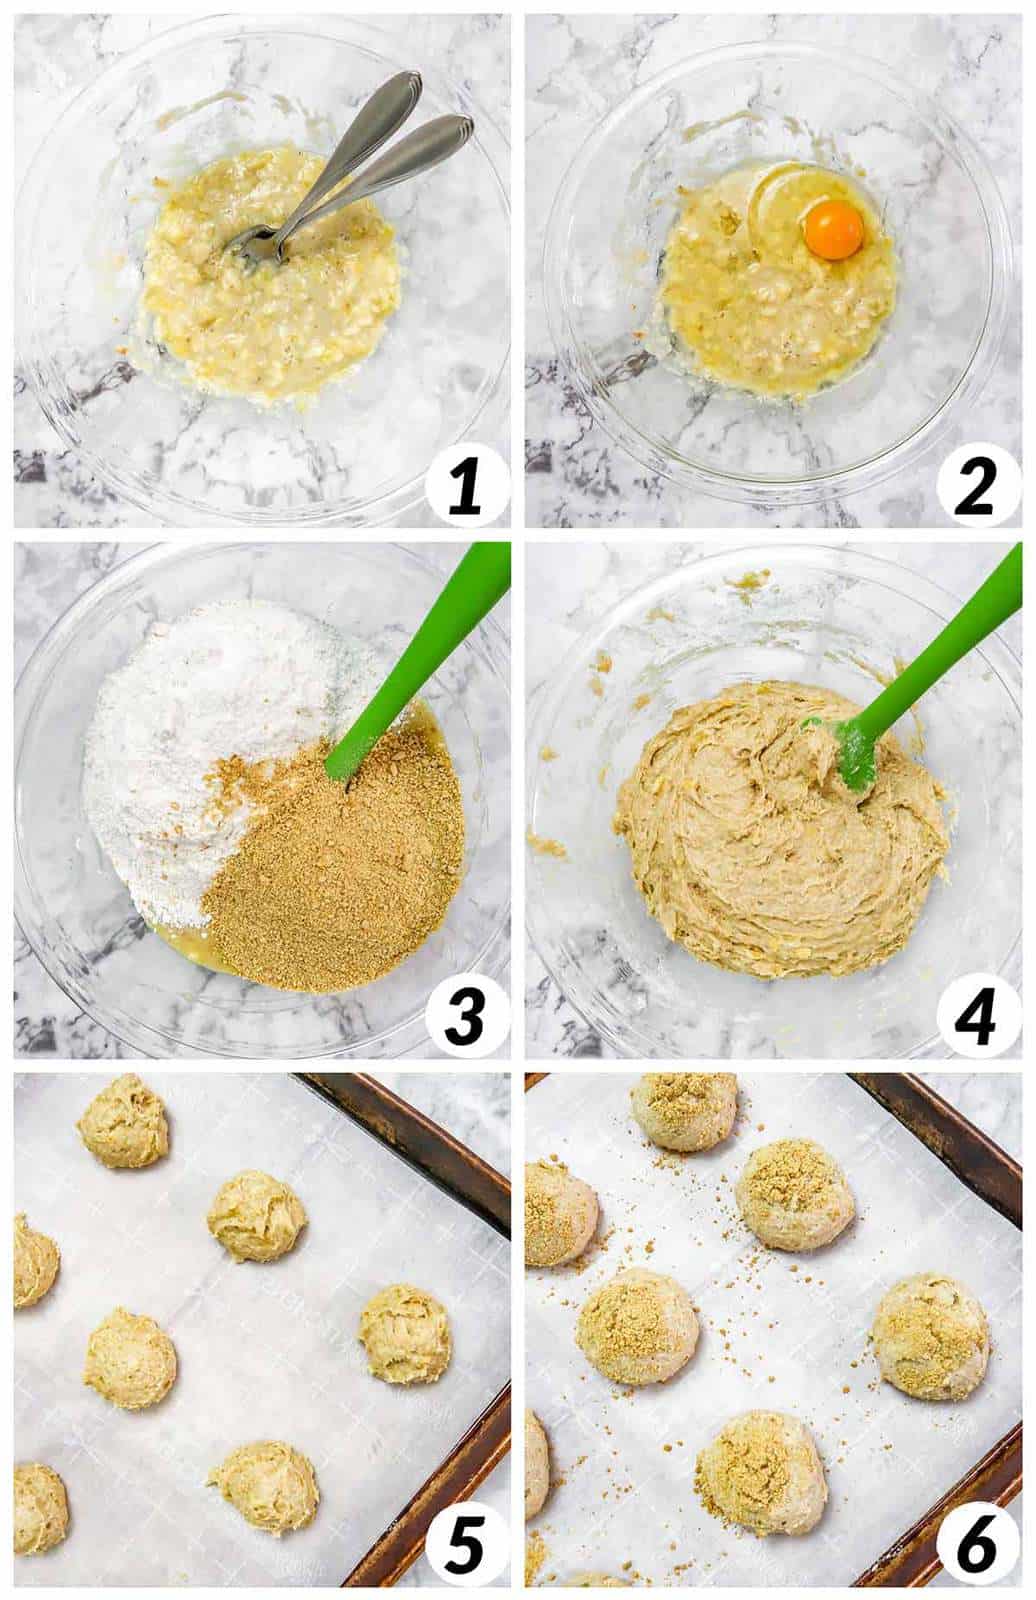 Six panel grid of process shots -mixing together ingredients, forming cookies, and baking.